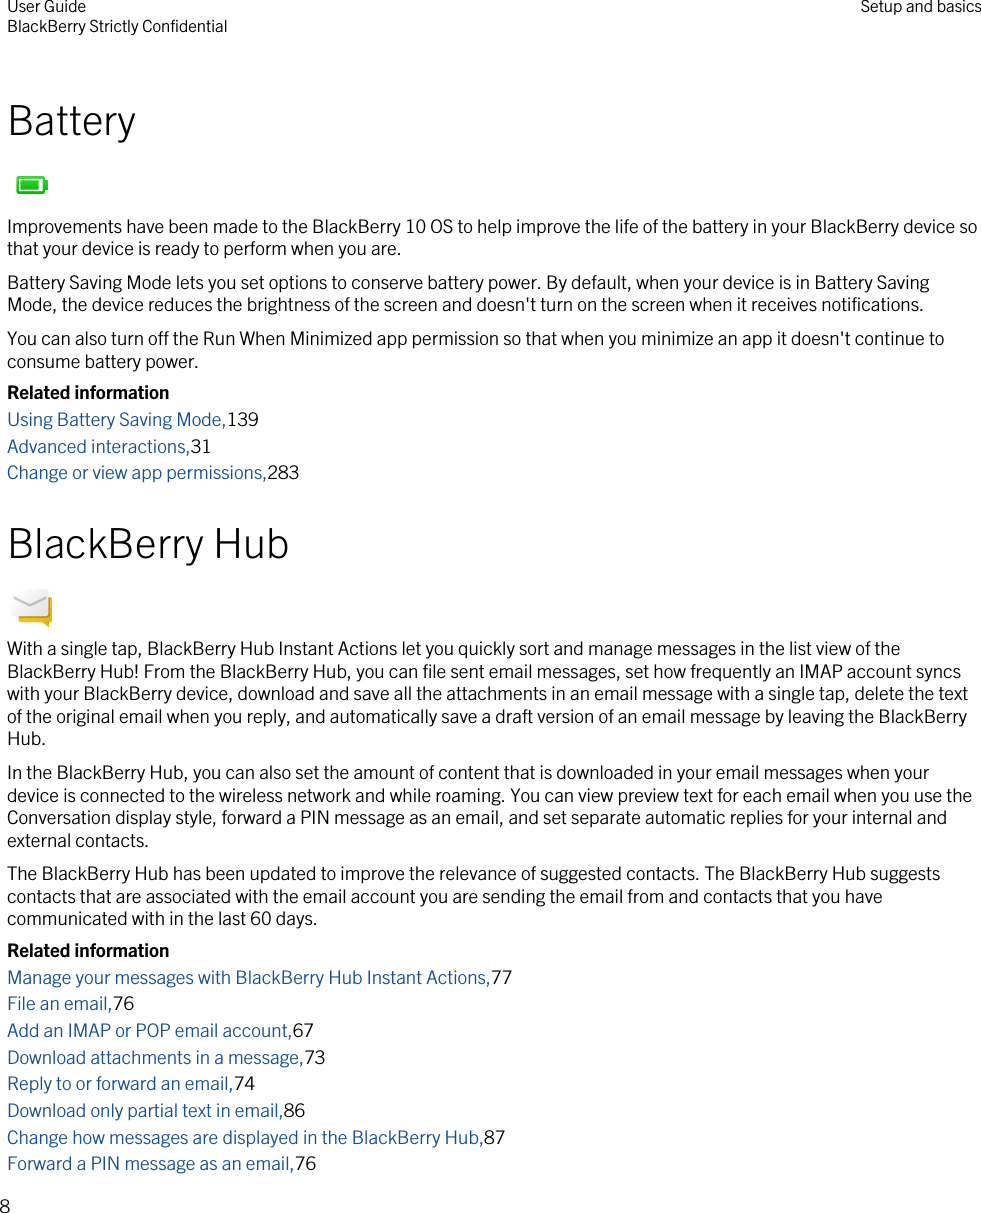 BatteryImprovements have been made to the BlackBerry 10 OS to help improve the life of the battery in your BlackBerry device so that your device is ready to perform when you are.Battery Saving Mode lets you set options to conserve battery power. By default, when your device is in Battery Saving Mode, the device reduces the brightness of the screen and doesn&apos;t turn on the screen when it receives notifications.You can also turn off the Run When Minimized app permission so that when you minimize an app it doesn&apos;t continue to consume battery power.Related informationUsing Battery Saving Mode,139Advanced interactions,31Change or view app permissions,283BlackBerry HubWith a single tap, BlackBerry Hub Instant Actions let you quickly sort and manage messages in the list view of the BlackBerry Hub! From the BlackBerry Hub, you can file sent email messages, set how frequently an IMAP account syncs with your BlackBerry device, download and save all the attachments in an email message with a single tap, delete the text of the original email when you reply, and automatically save a draft version of an email message by leaving the BlackBerry Hub.In the BlackBerry Hub, you can also set the amount of content that is downloaded in your email messages when your device is connected to the wireless network and while roaming. You can view preview text for each email when you use the Conversation display style, forward a PIN message as an email, and set separate automatic replies for your internal and external contacts.The BlackBerry Hub has been updated to improve the relevance of suggested contacts. The BlackBerry Hub suggests contacts that are associated with the email account you are sending the email from and contacts that you have communicated with in the last 60 days.Related informationManage your messages with BlackBerry Hub Instant Actions,77File an email,76Add an IMAP or POP email account,67Download attachments in a message,73Reply to or forward an email,74Download only partial text in email,86Change how messages are displayed in the BlackBerry Hub,87Forward a PIN message as an email,76User GuideBlackBerry Strictly Confidential Setup and basics8